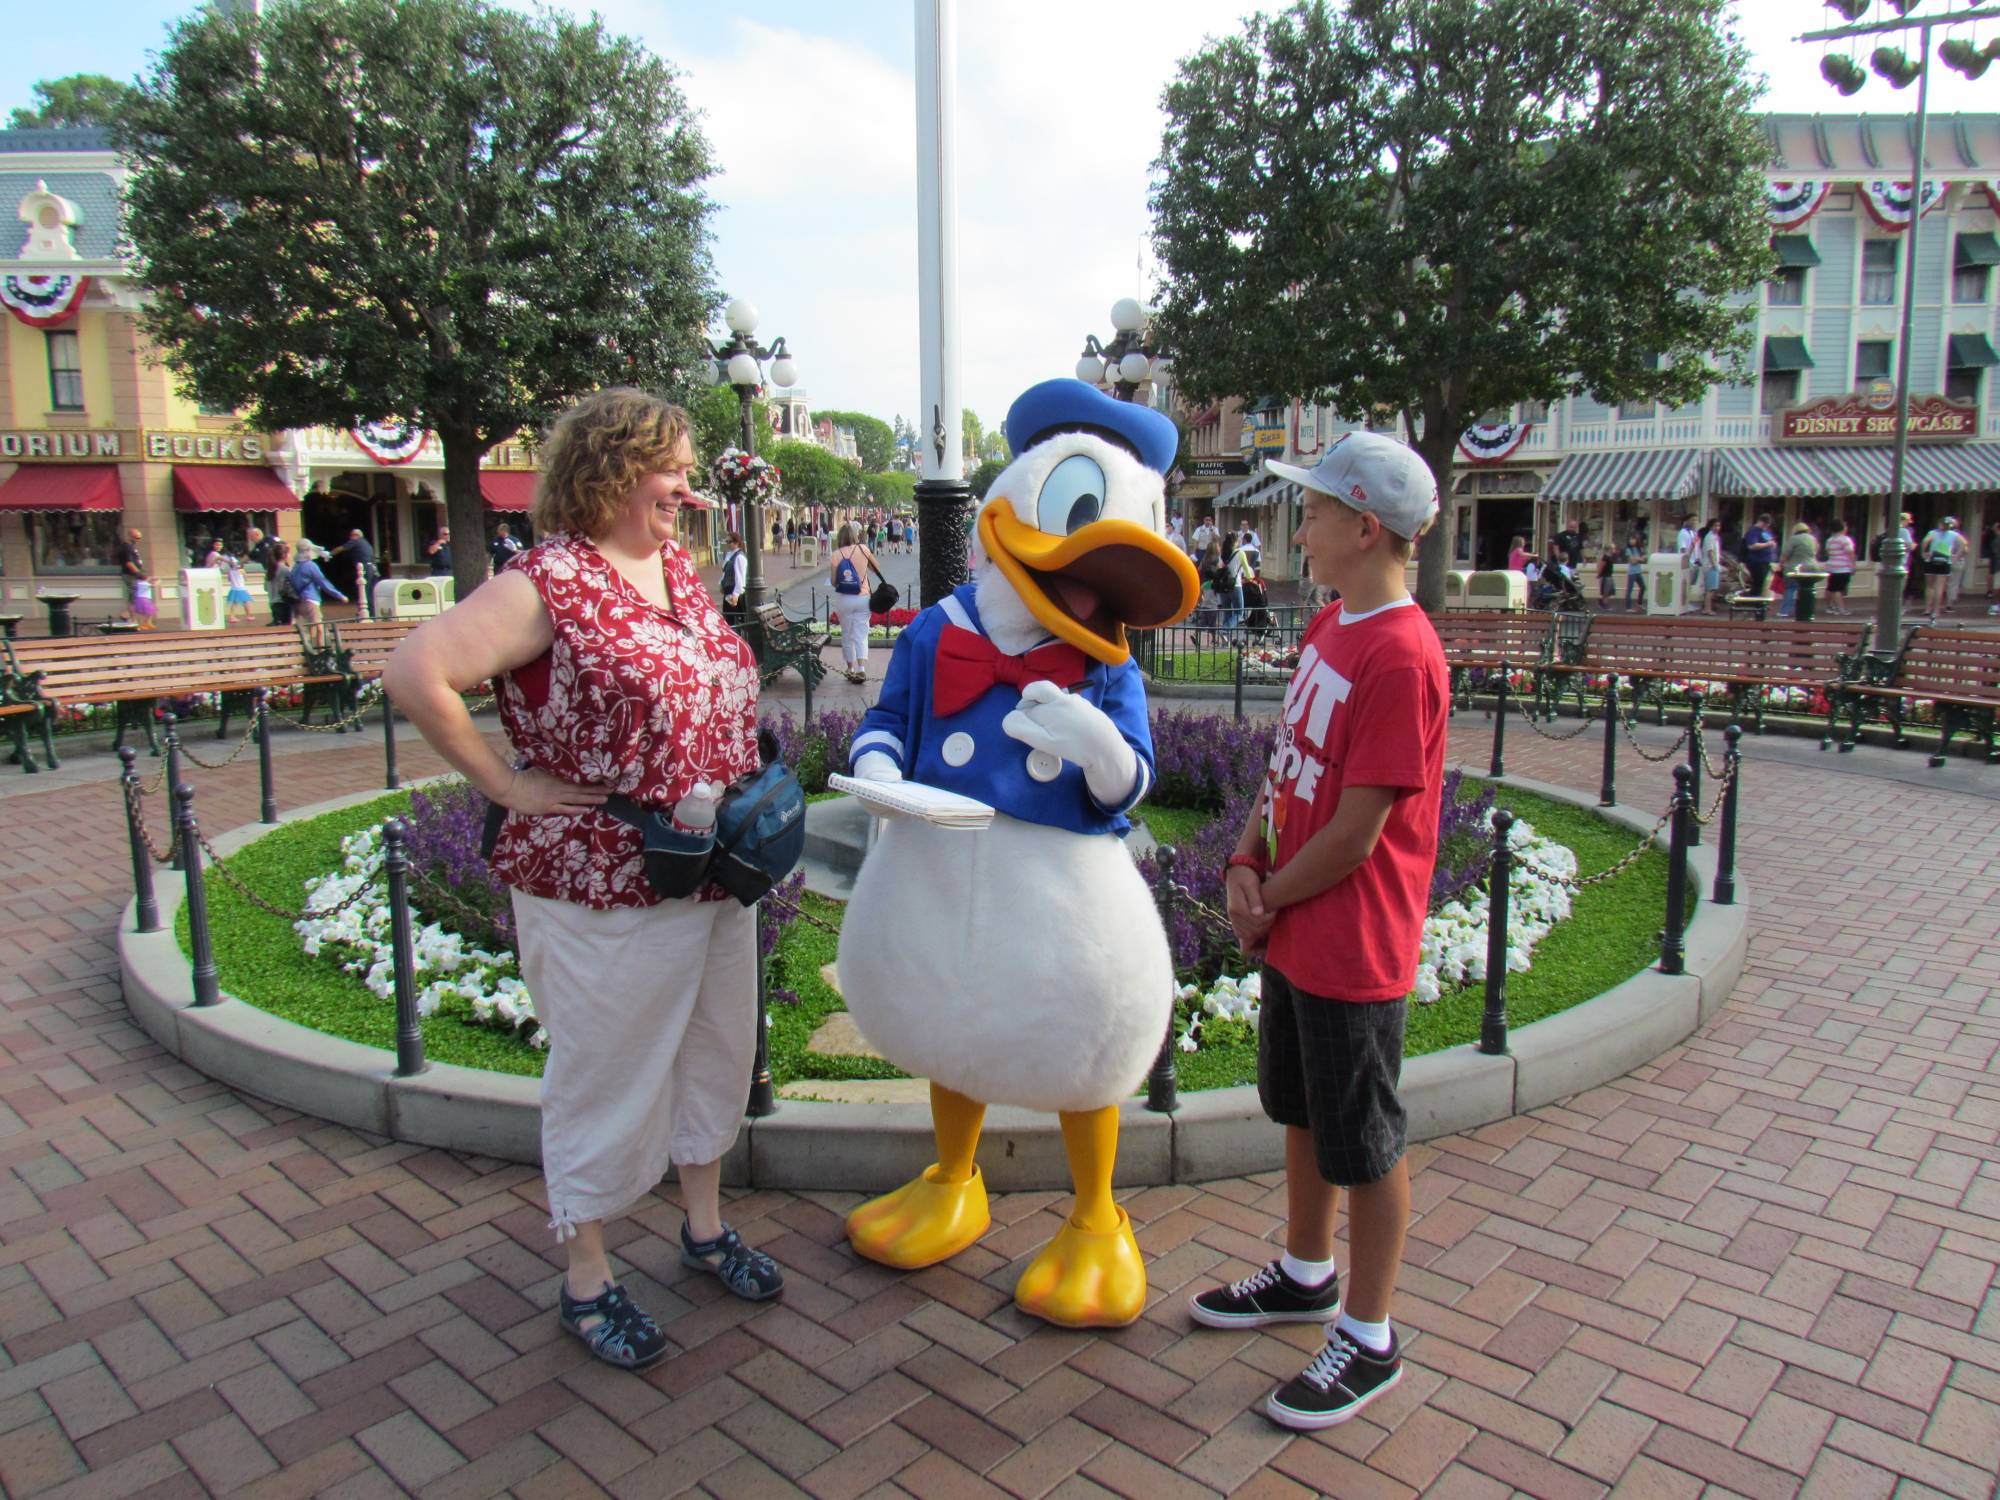 Autograph with Donald Duck